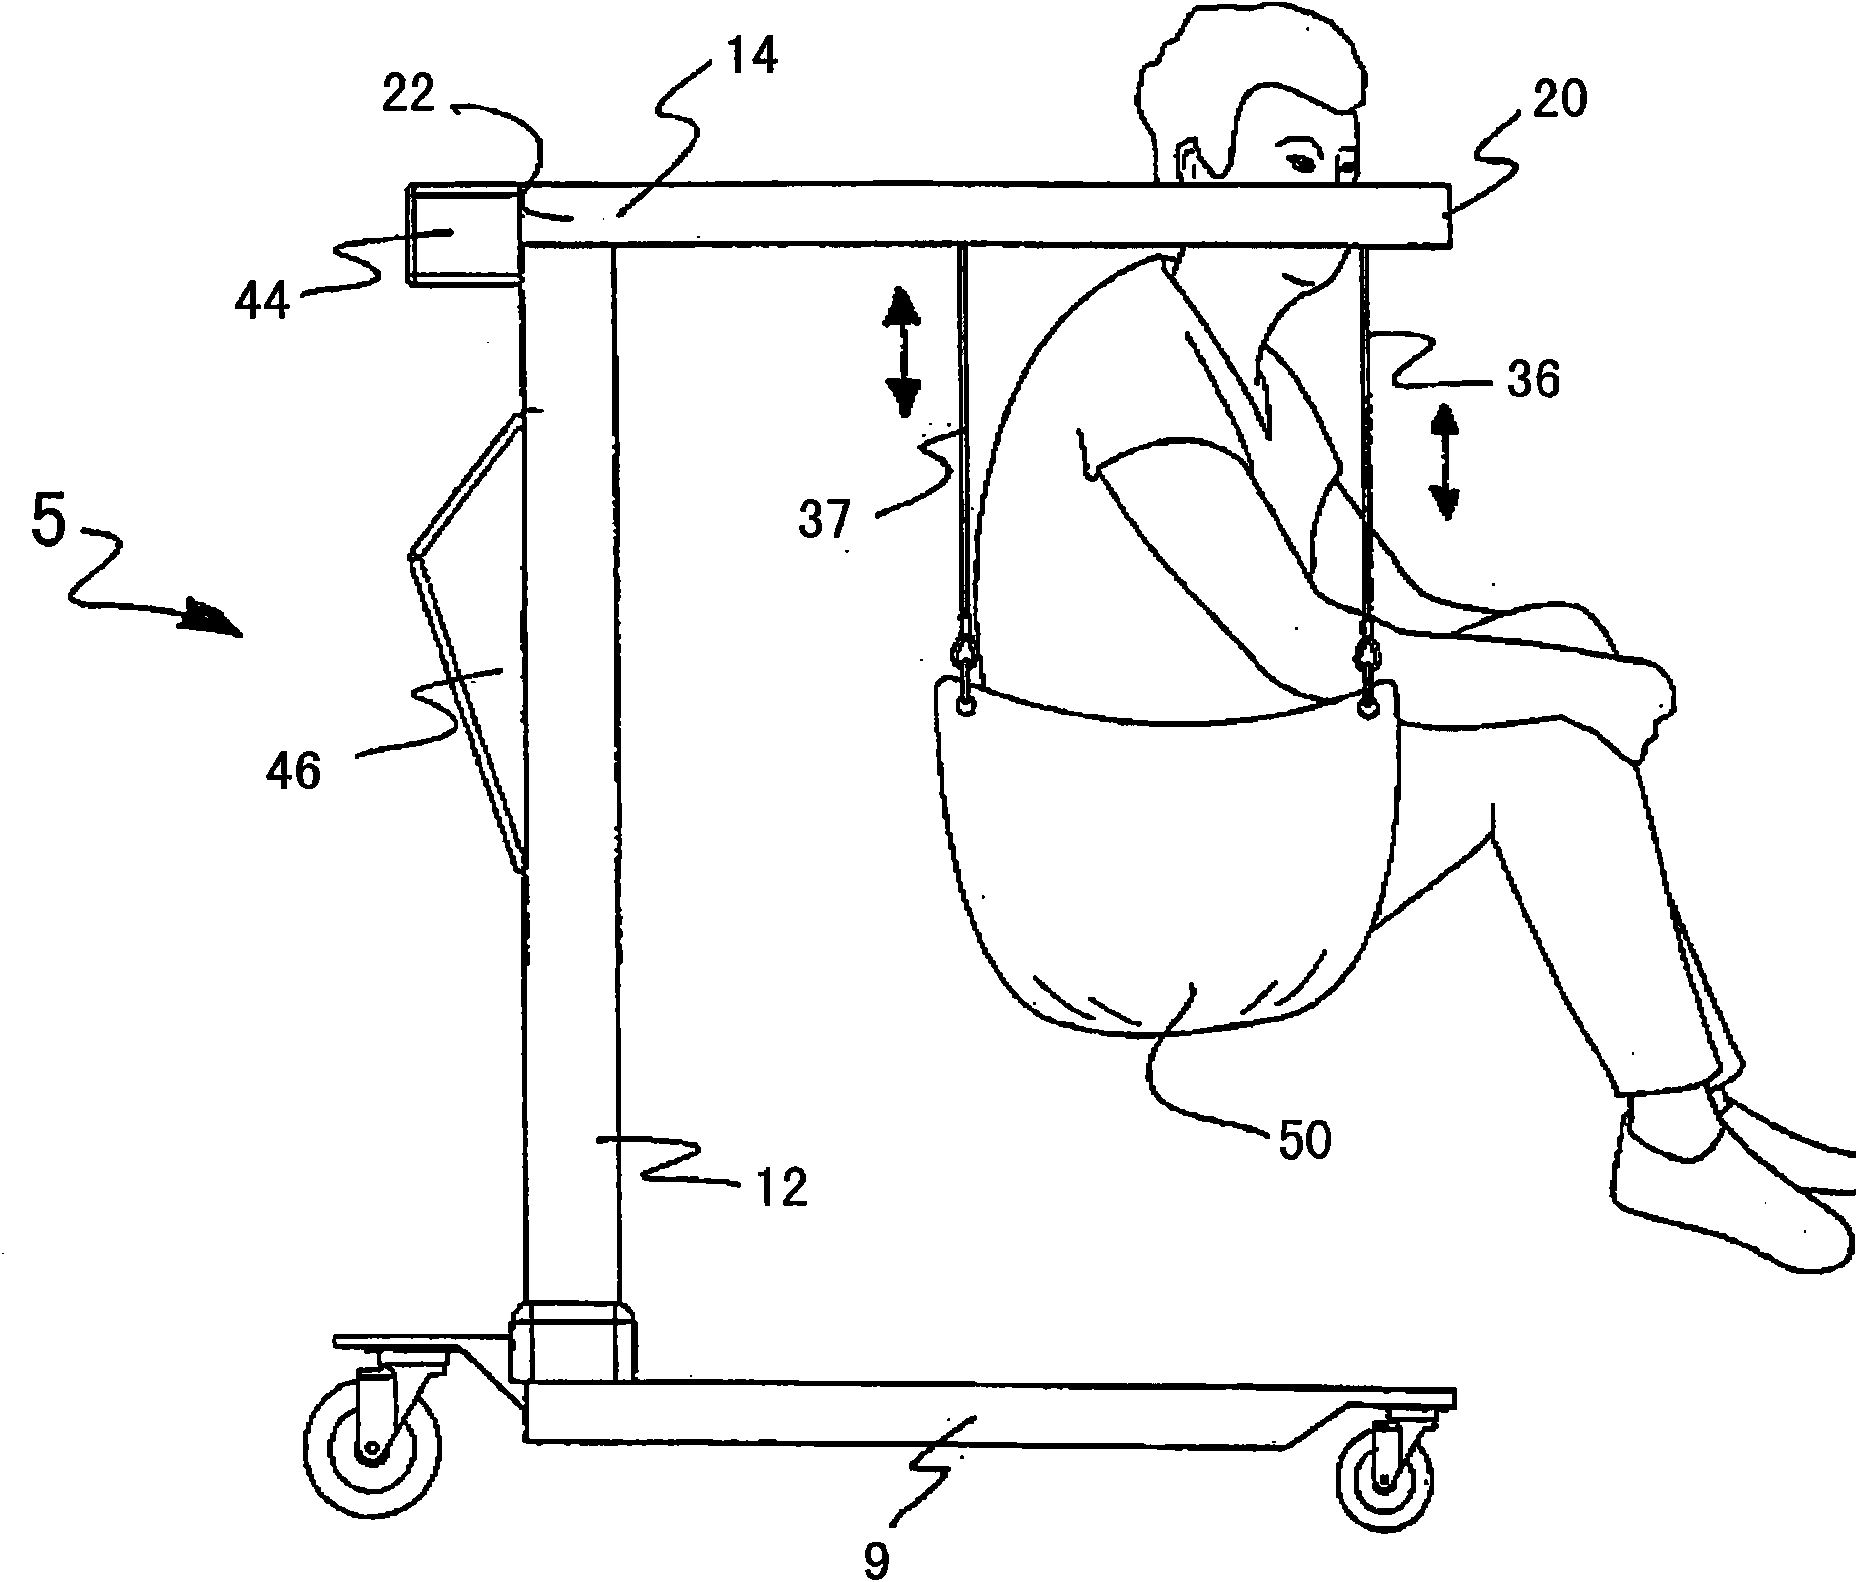 Improved patient lifting apparatus